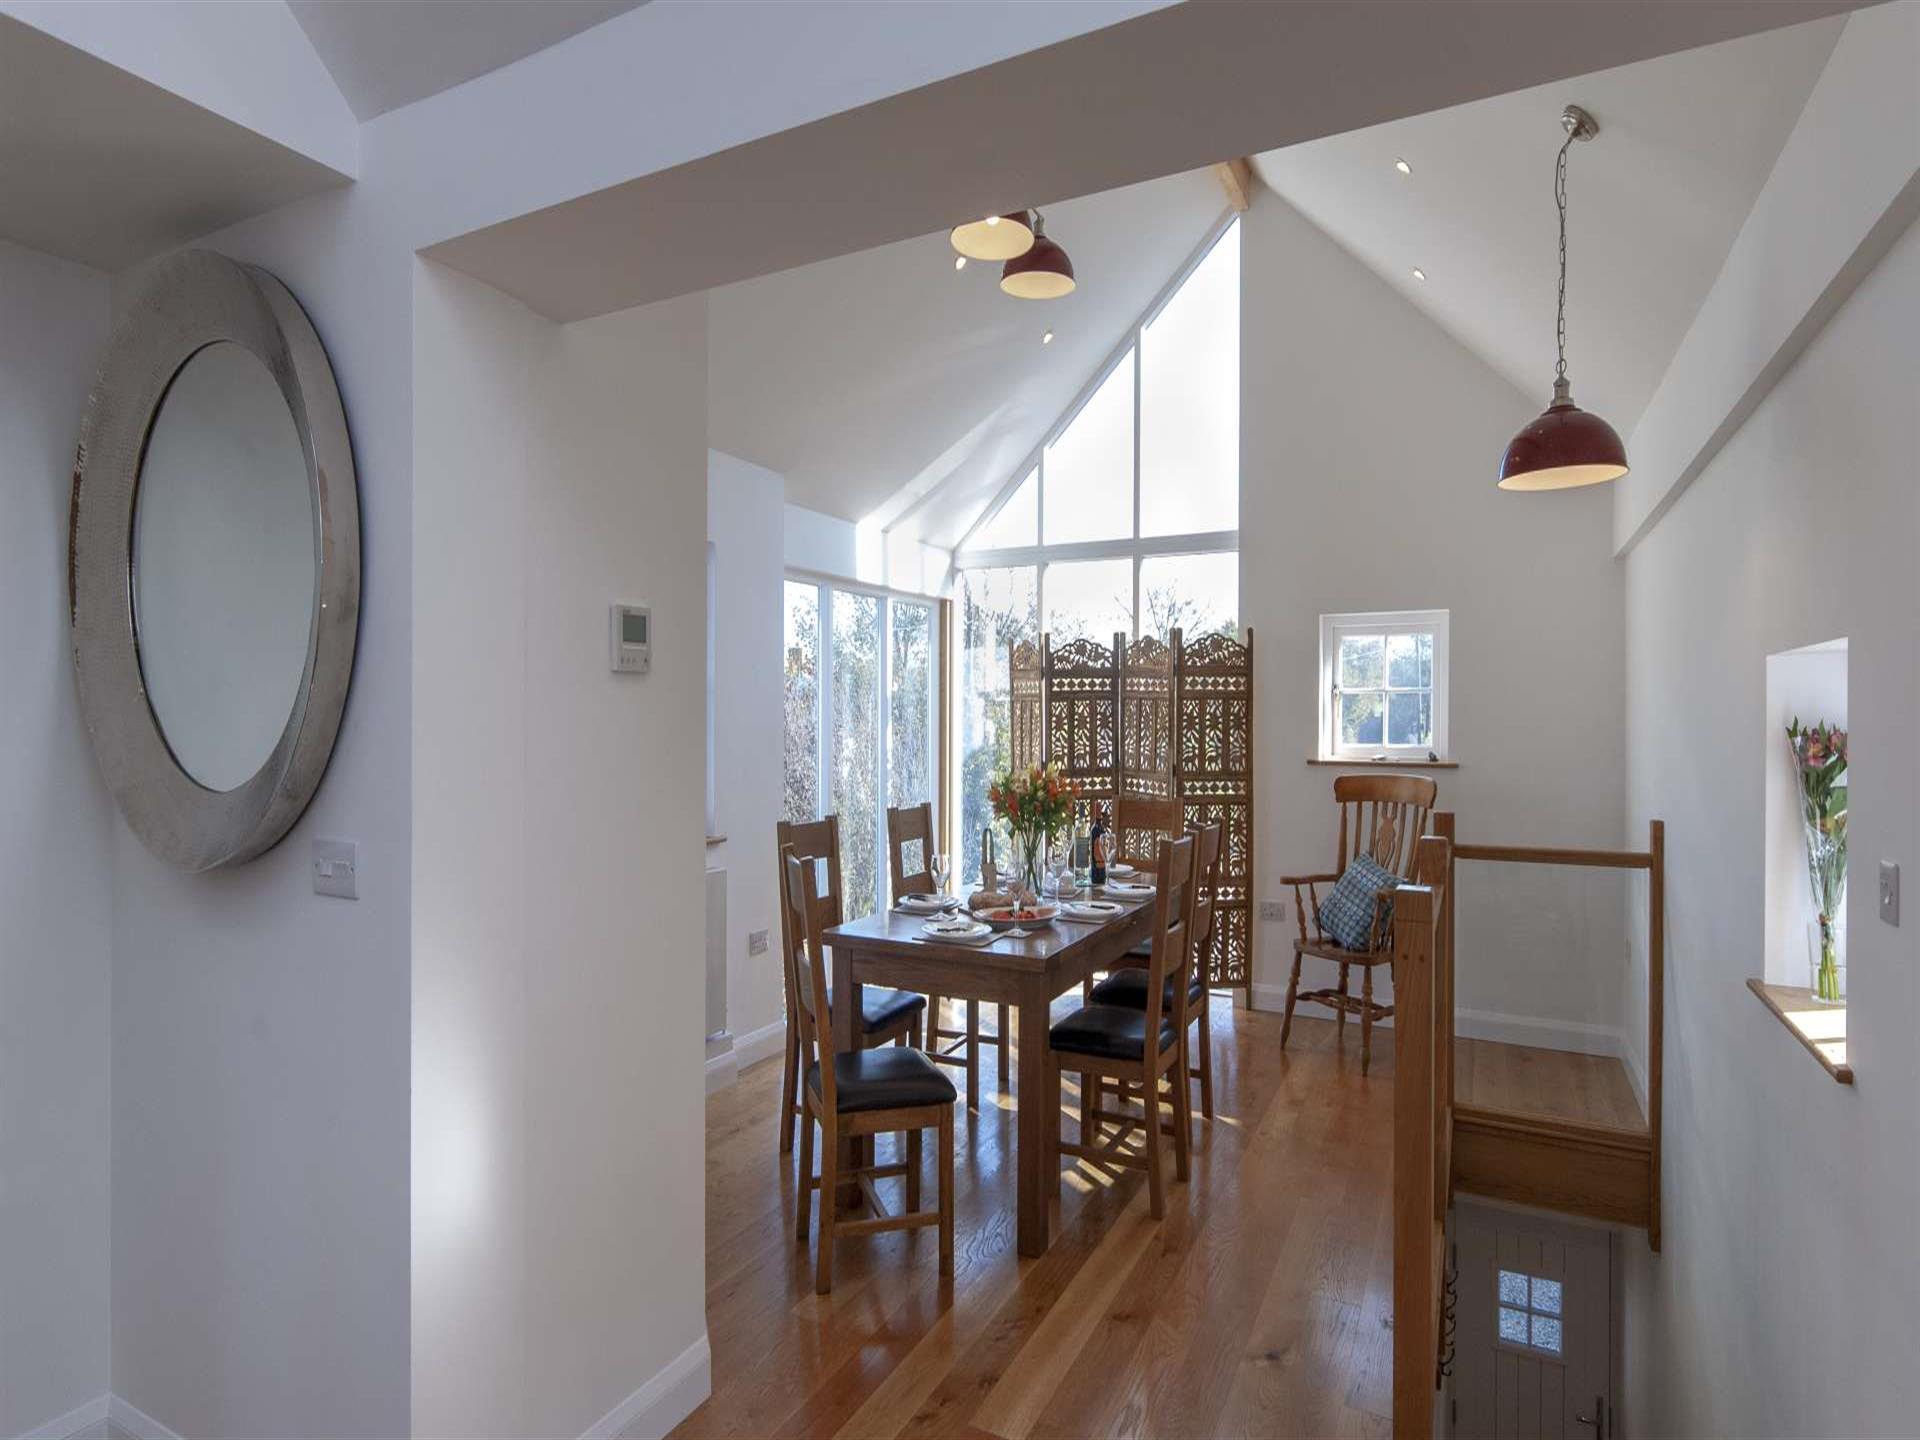 Porthgain self catering - first floor Loft with oa